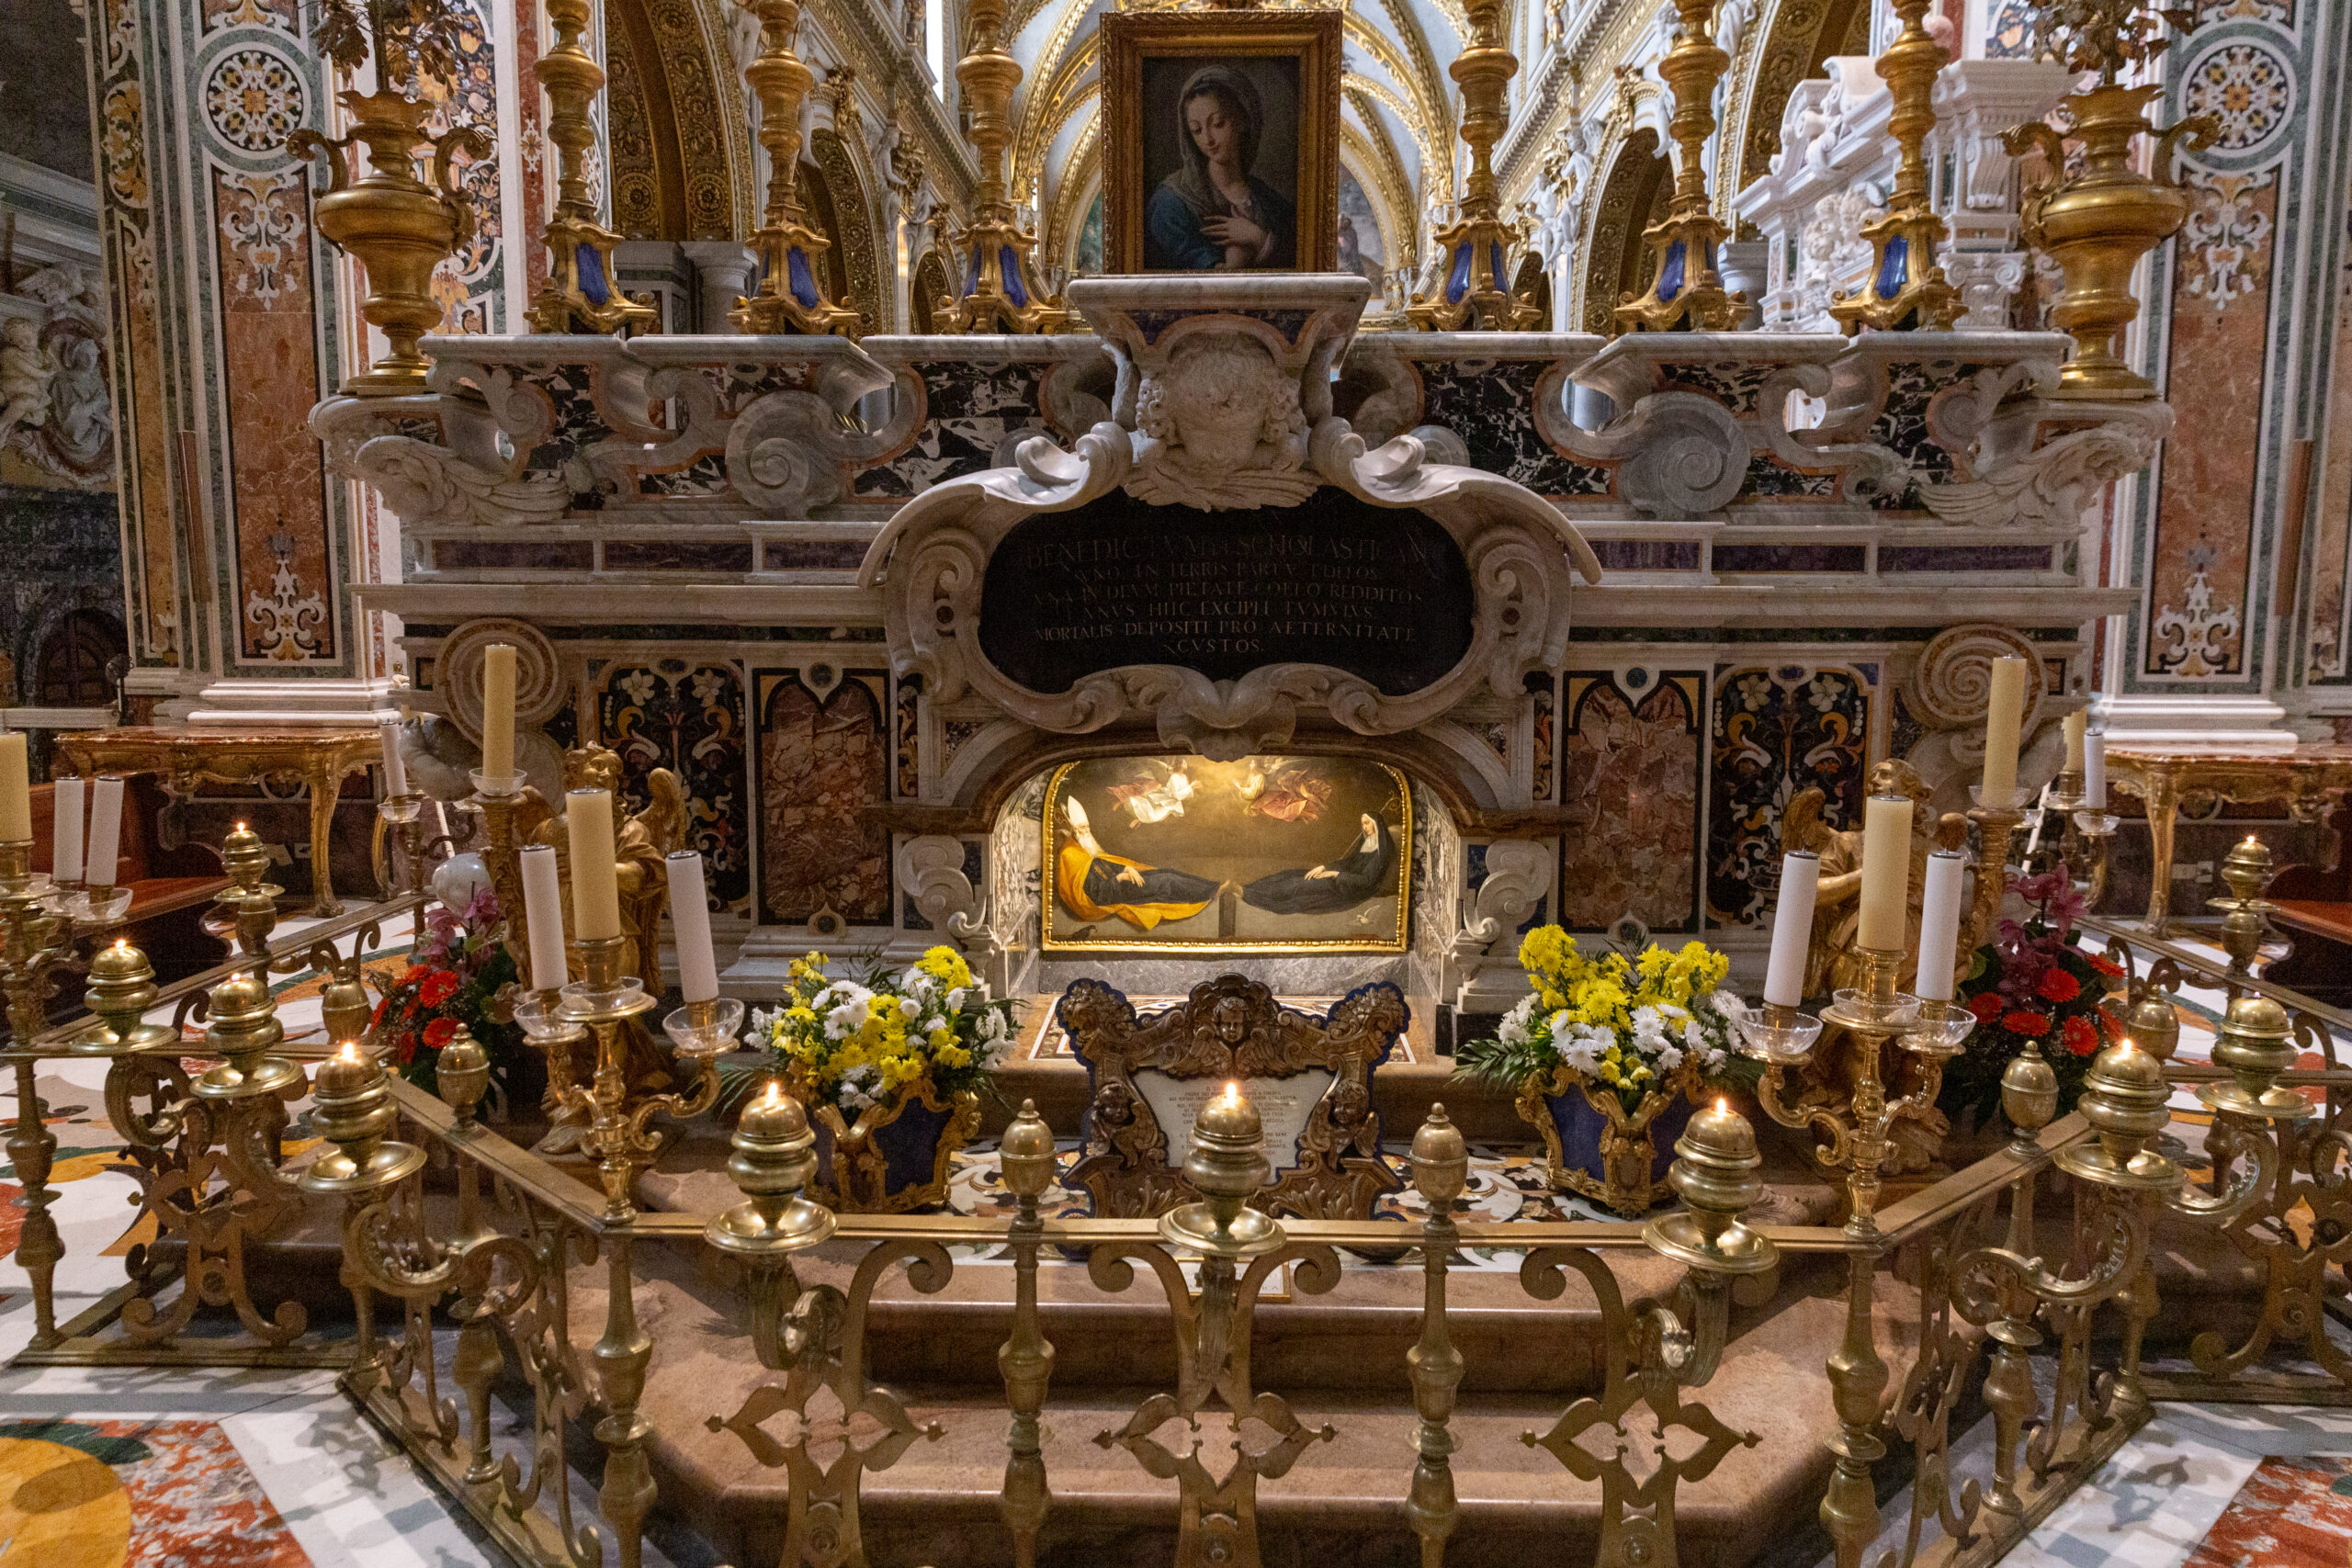 Tomb of Sts. Benedict and Scholastica behind the main altar of the cathedral-basilica(Photo: Bénédicte Cedergren)